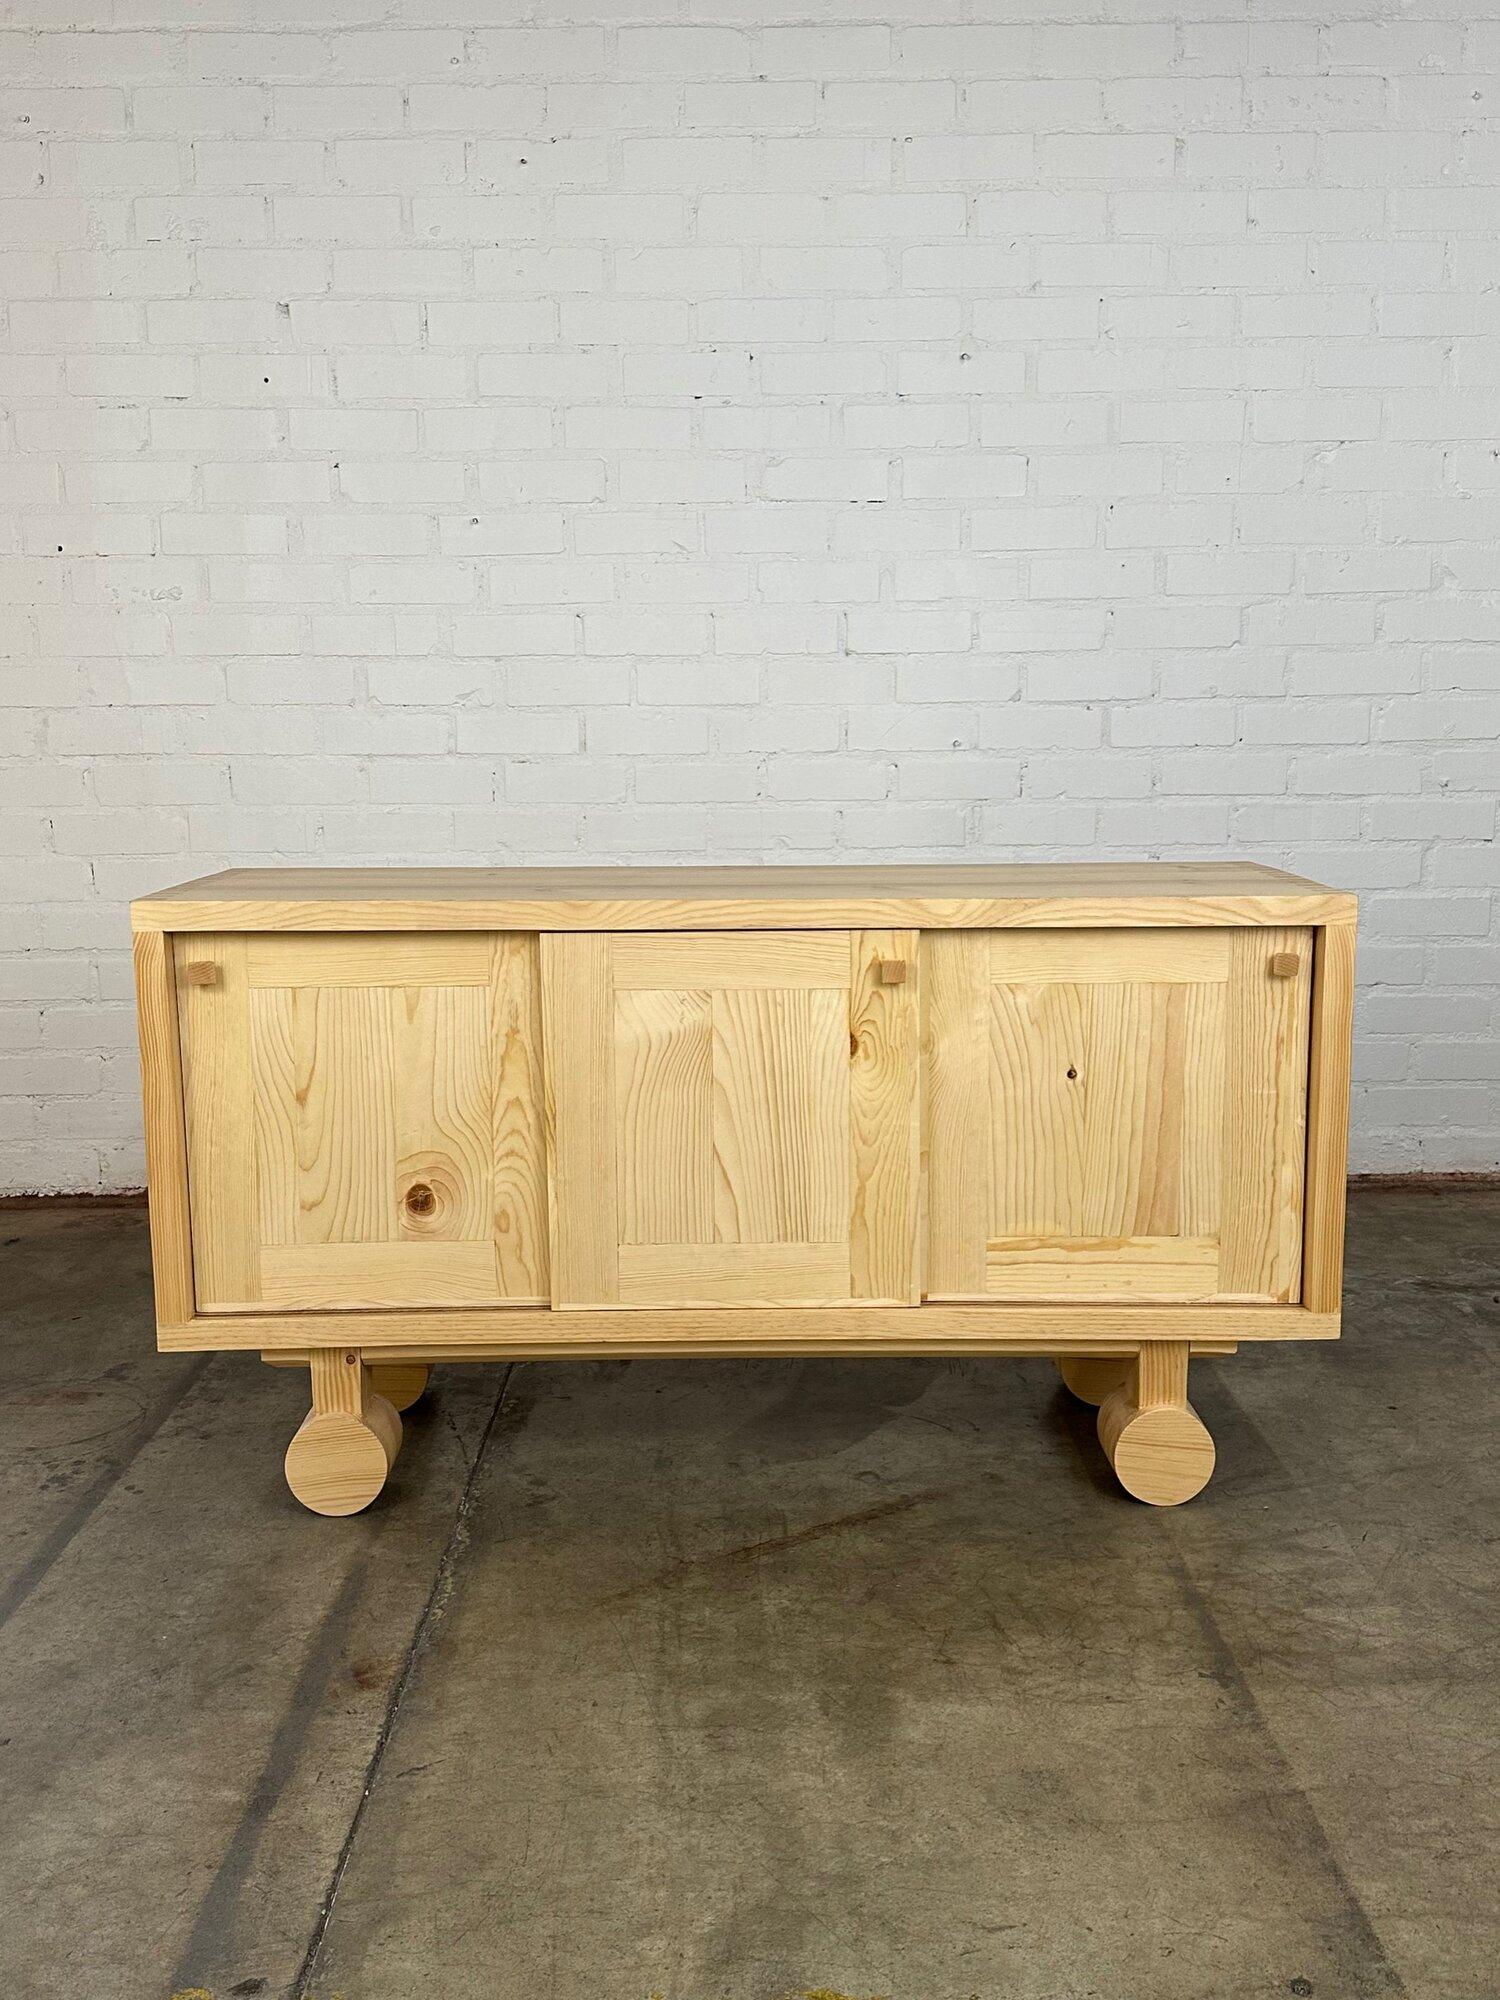 W60 D18 H32

Trolley Credenza made in house in solid Pine. Item has three sliding doors and two thick removable shelves. Credenza offers very nice dovetail corners and turned legs with a cross bar added for ample support. Hardware is also